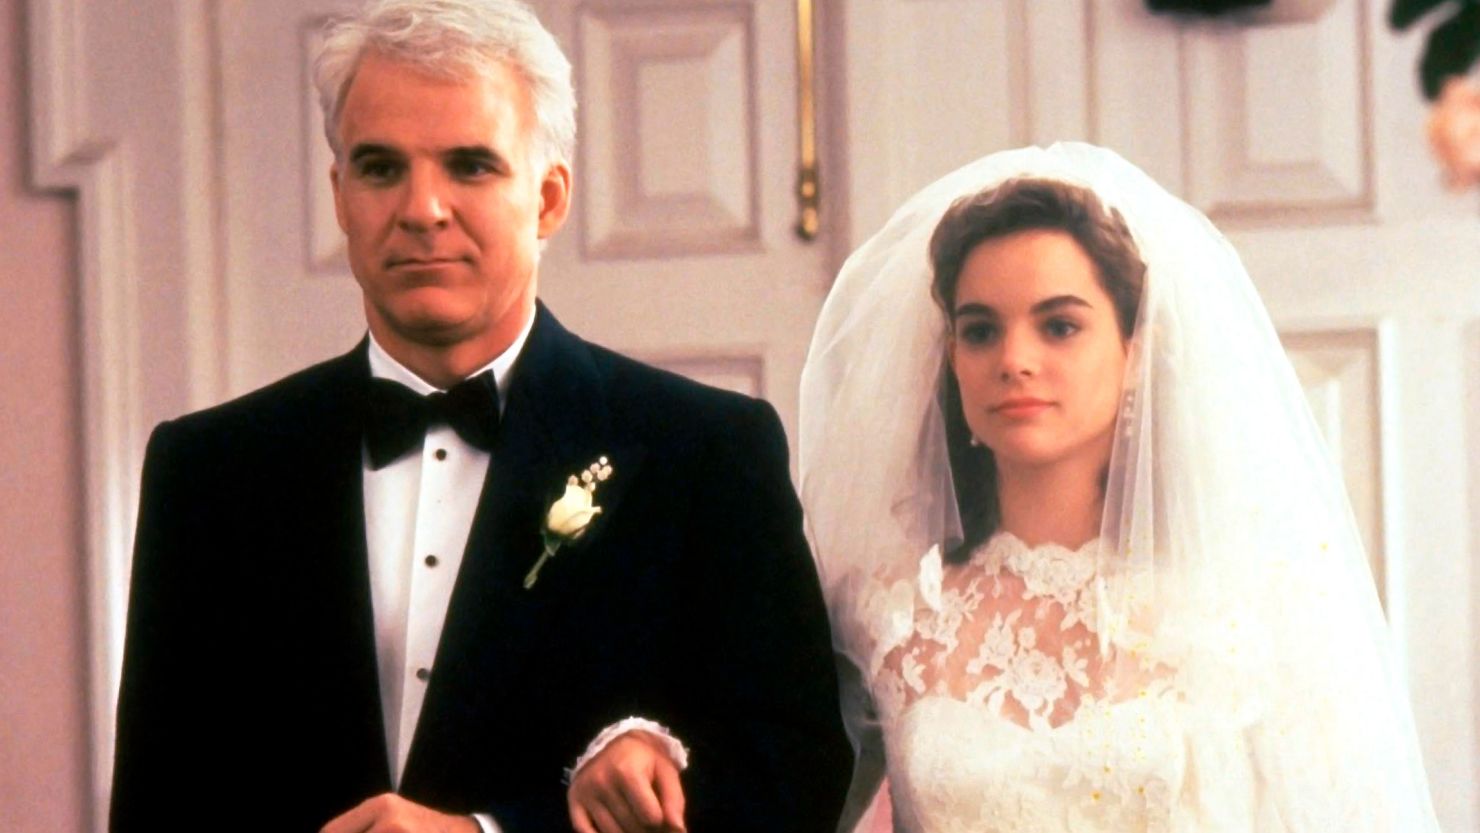 "Father of the Bride" starred Steve Martin as George Banks and Kimberly Williams-Paisley as his daughter, Annie.